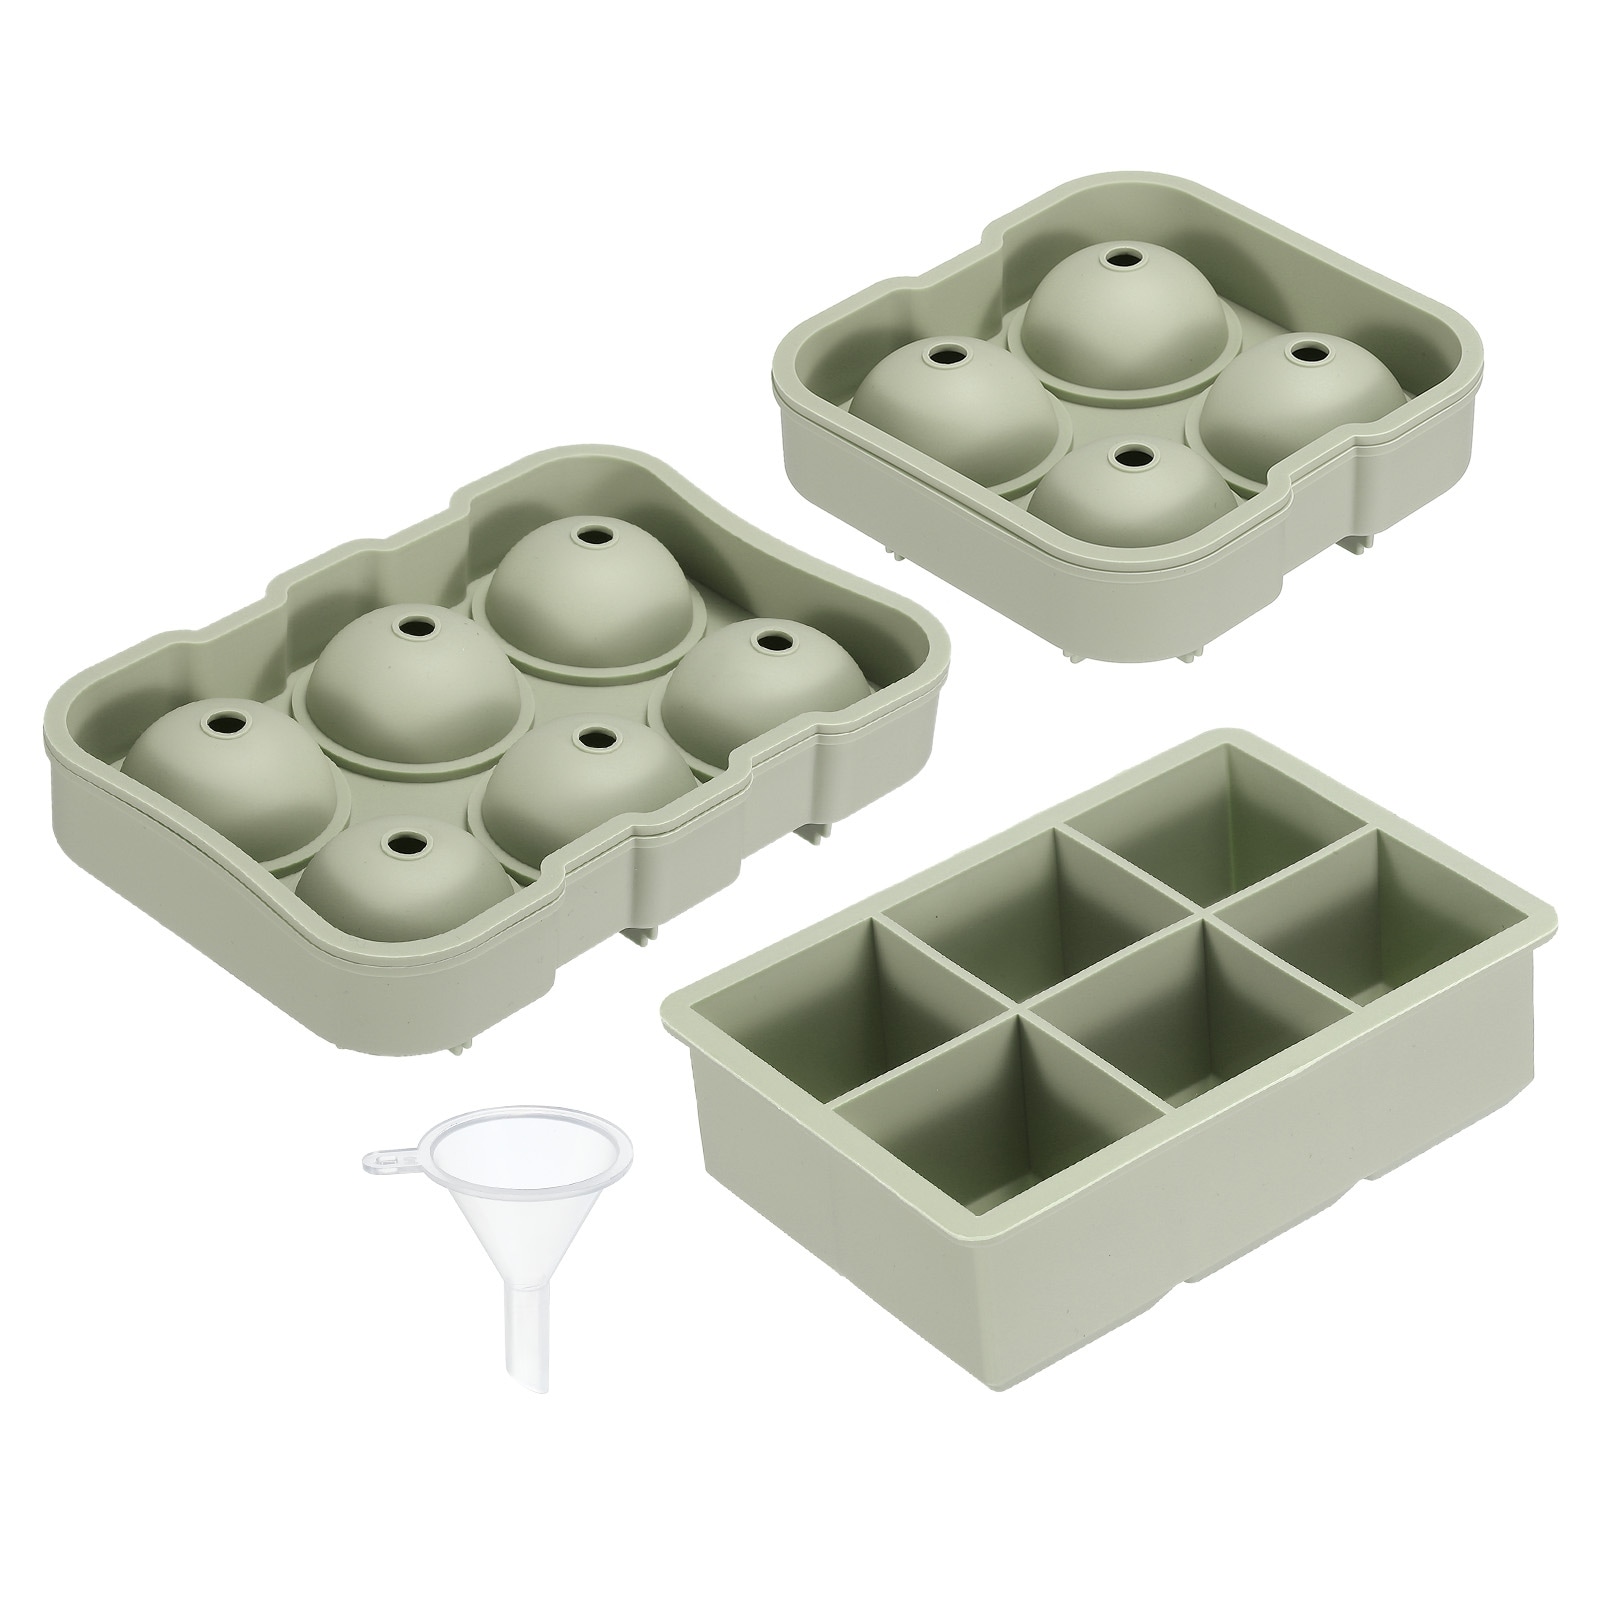 True Sphere Ice Tray, Dishwasher-Safe Silicone Ice Mold, Makes 2